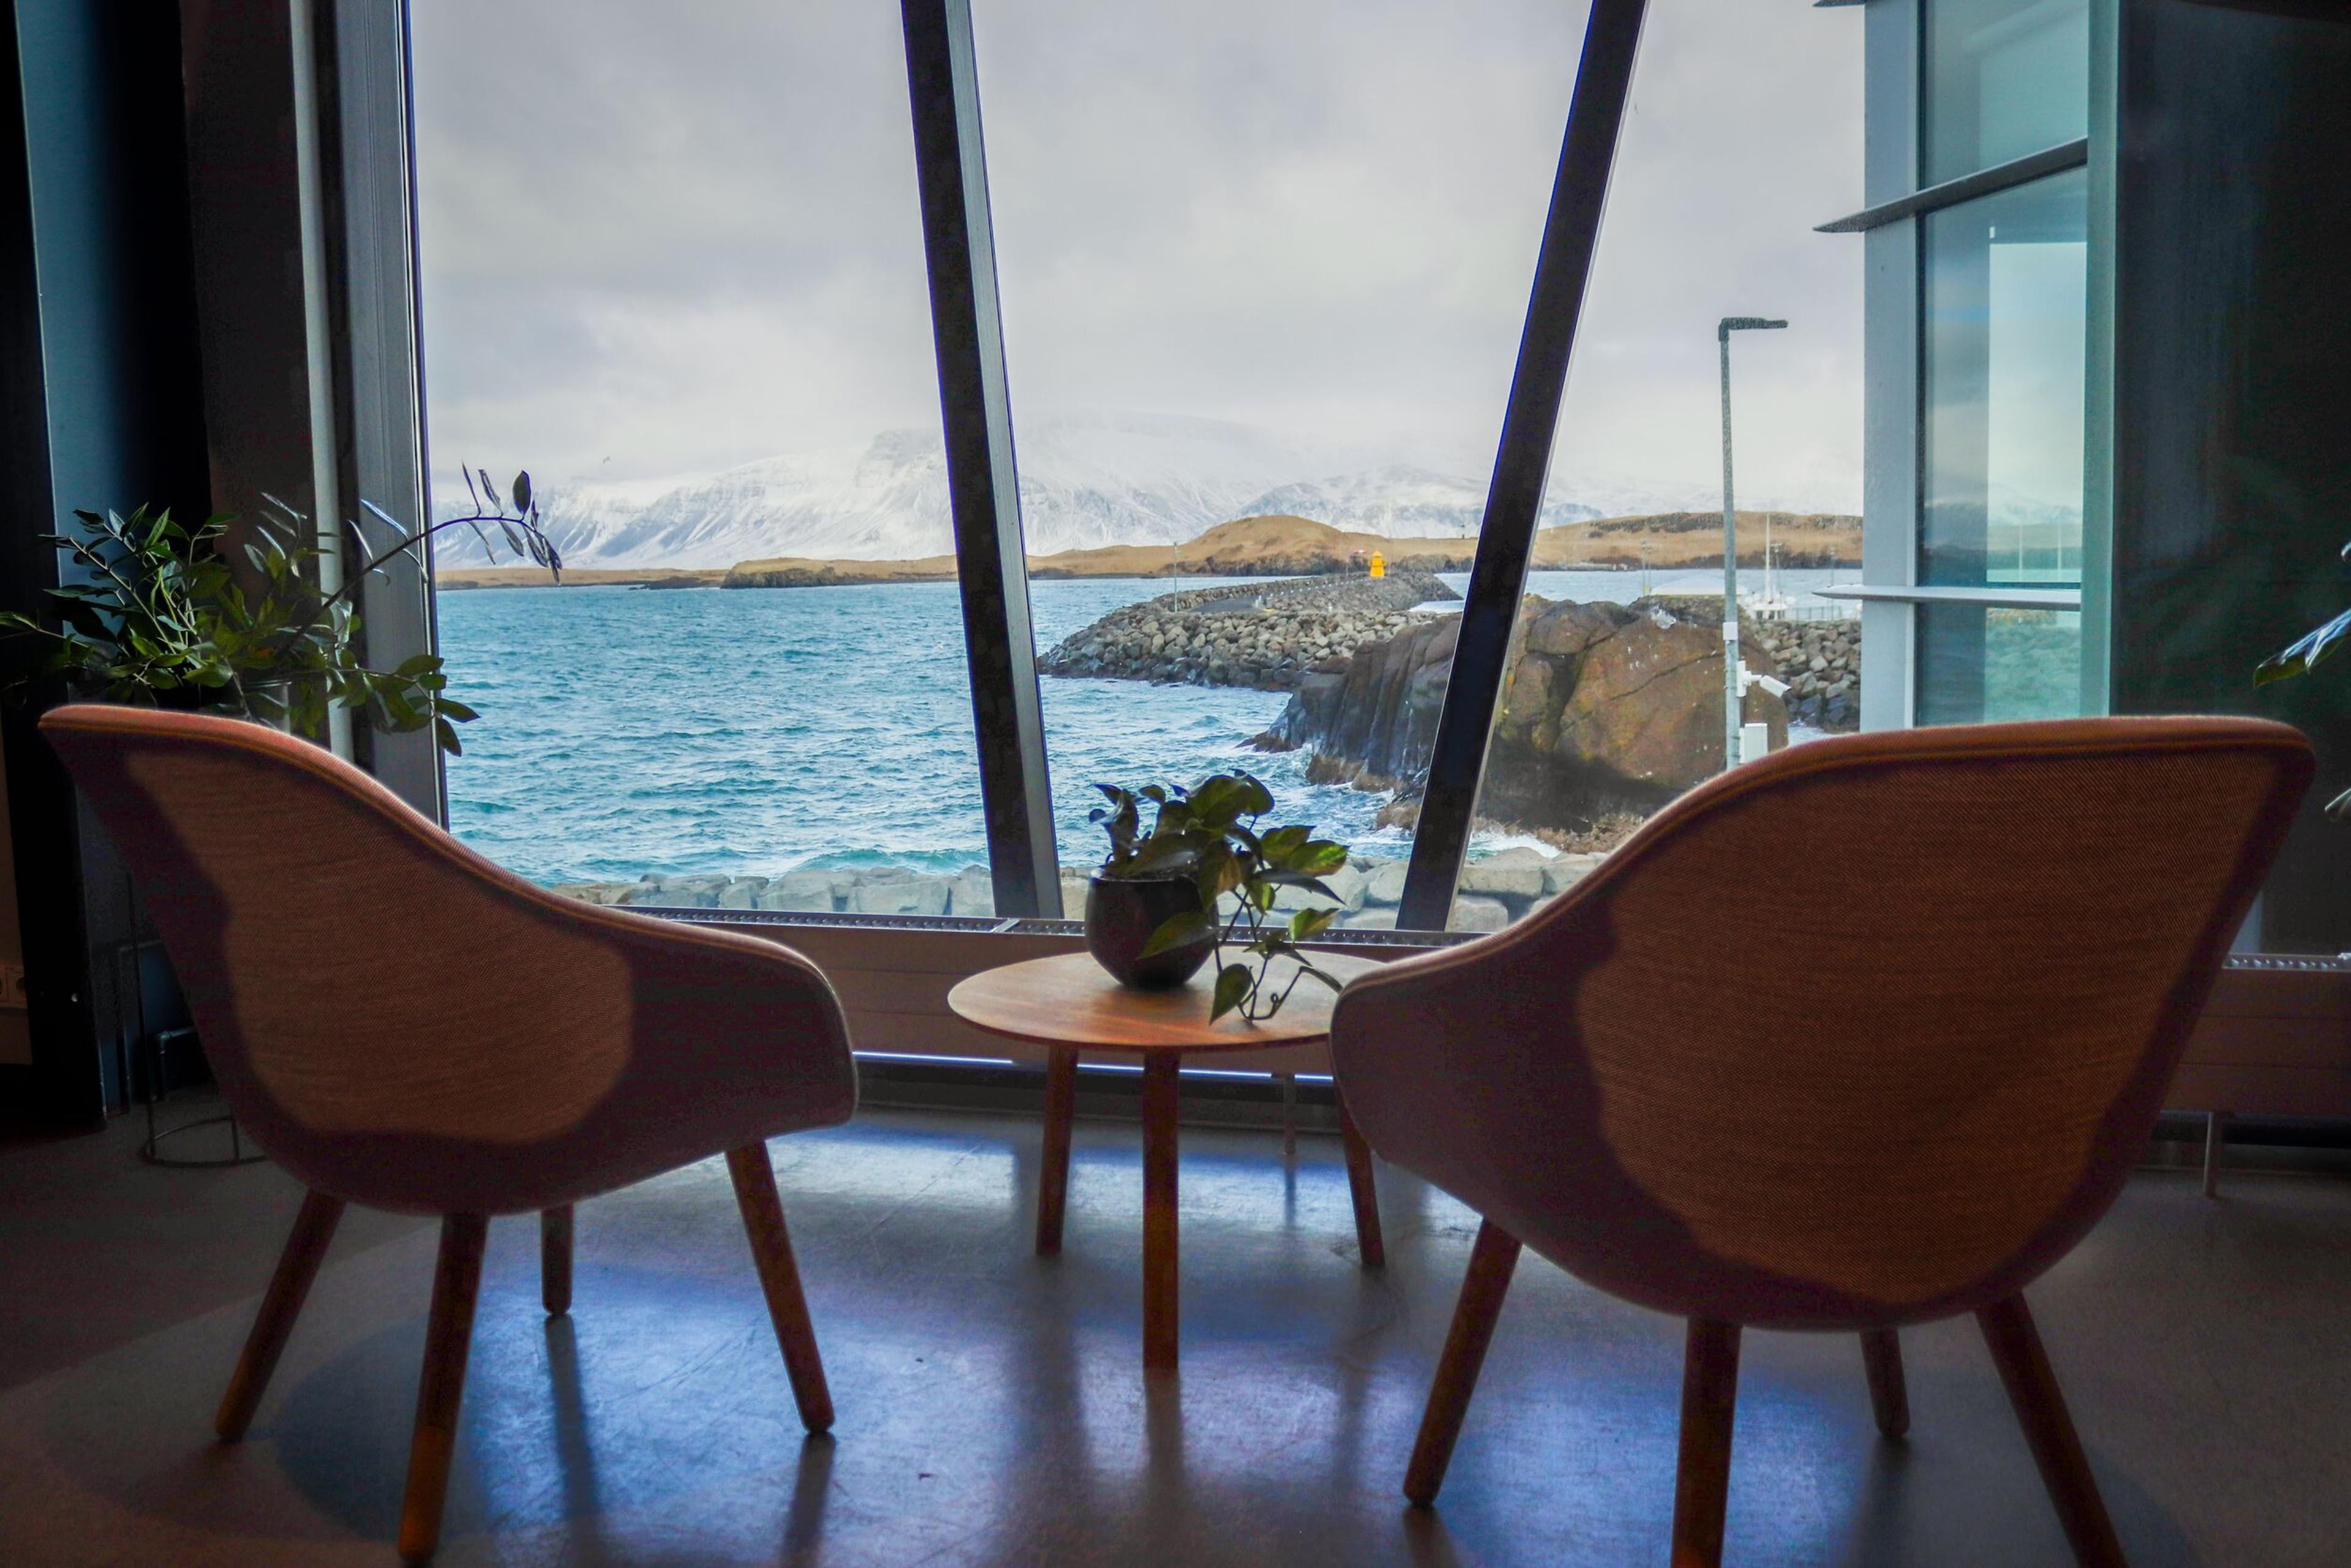 Beautiful view through a window with a focus on a table set with two chairs in the room, a small plant in the center, and a pair of glasses, suggesting a cozy spot for a meeting or relaxation with the same picturesque view of the sea and mountains.